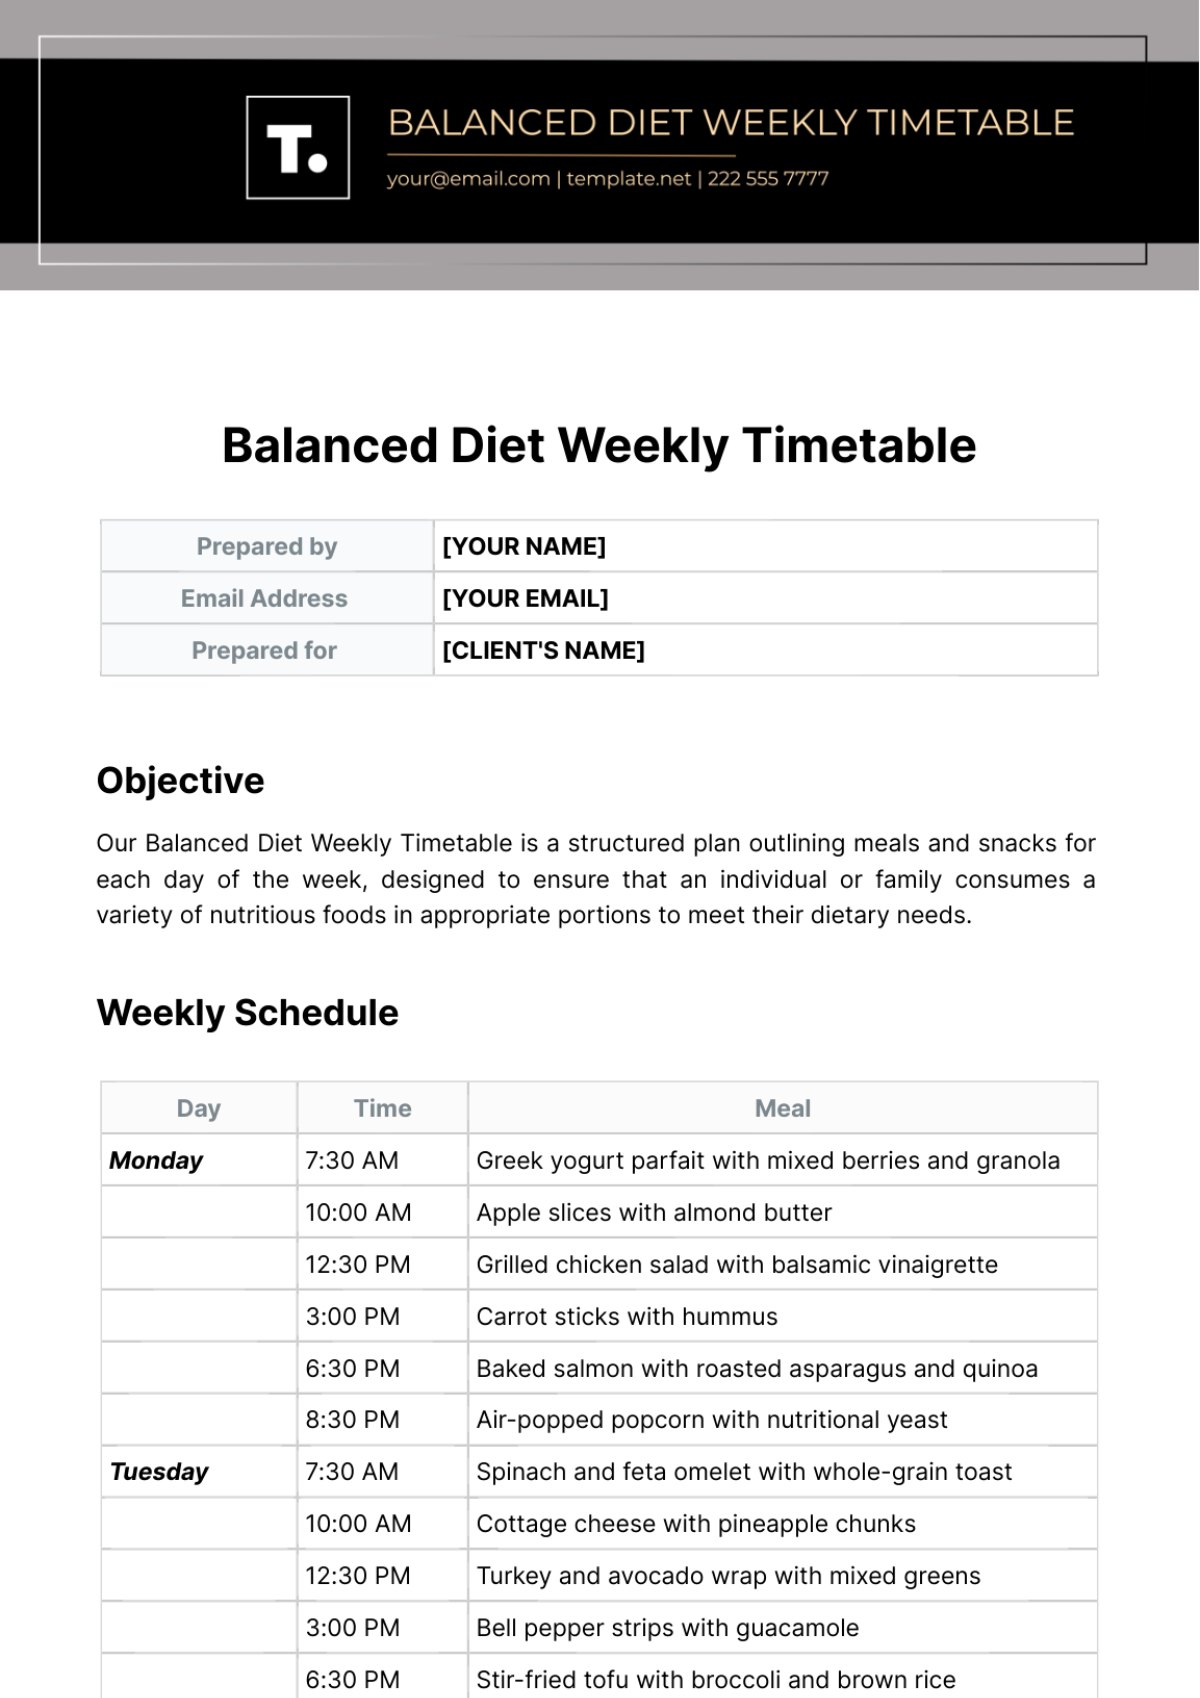 Balanced Diet Weekly Timetable Template